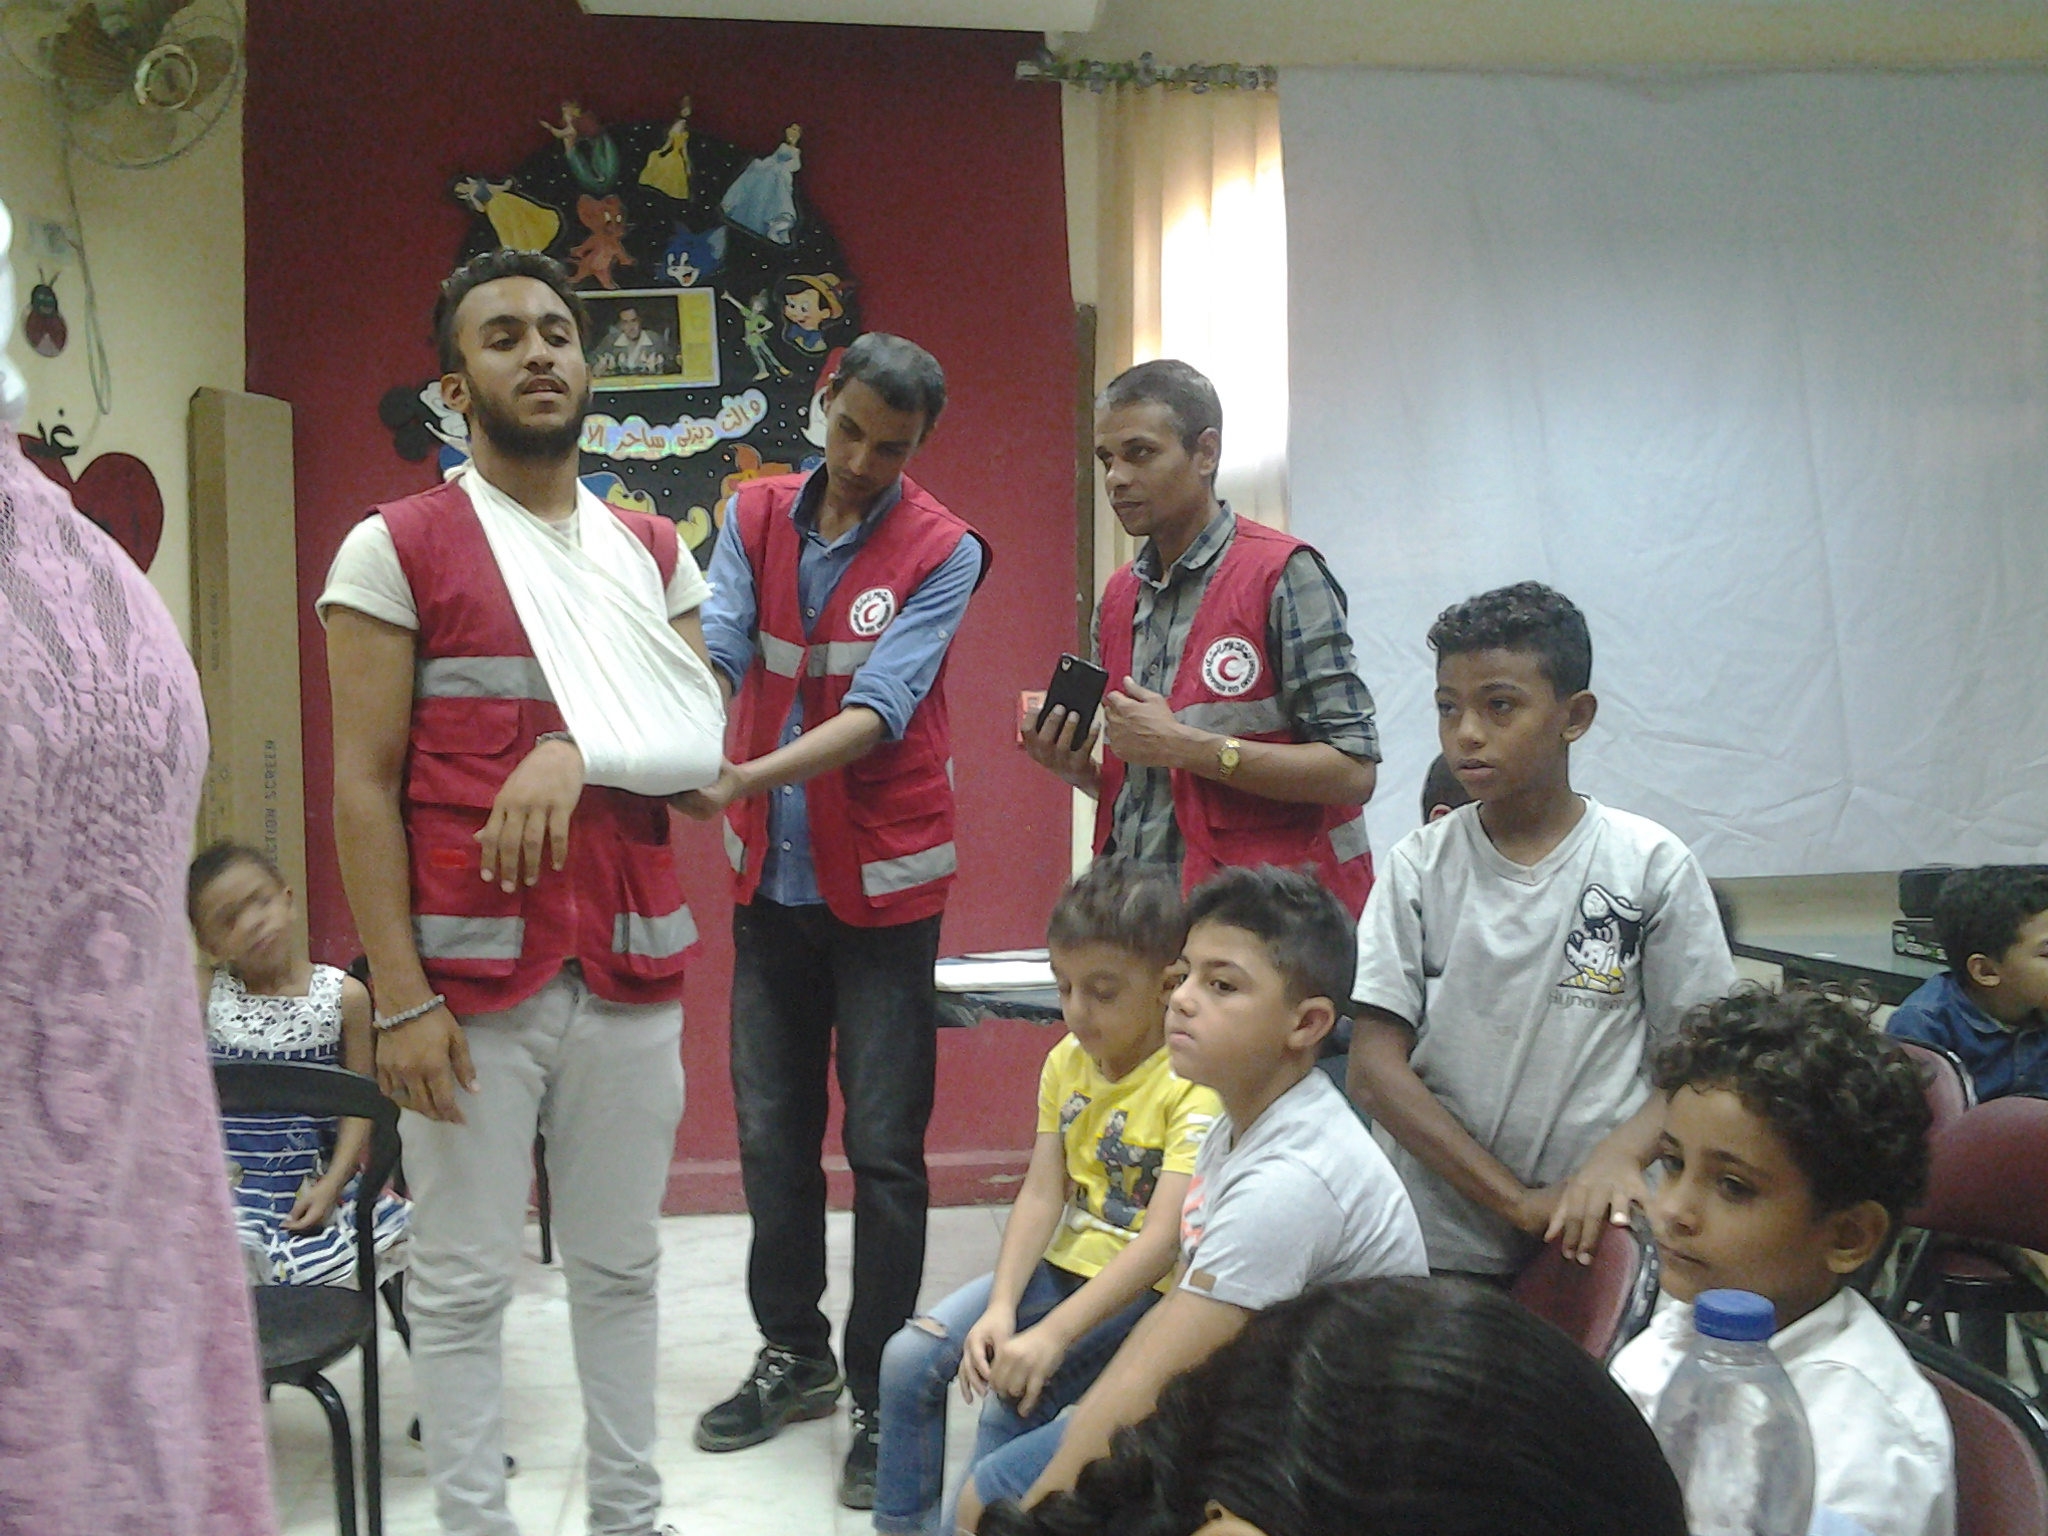 Symposium in cooperation with the Red Crescent